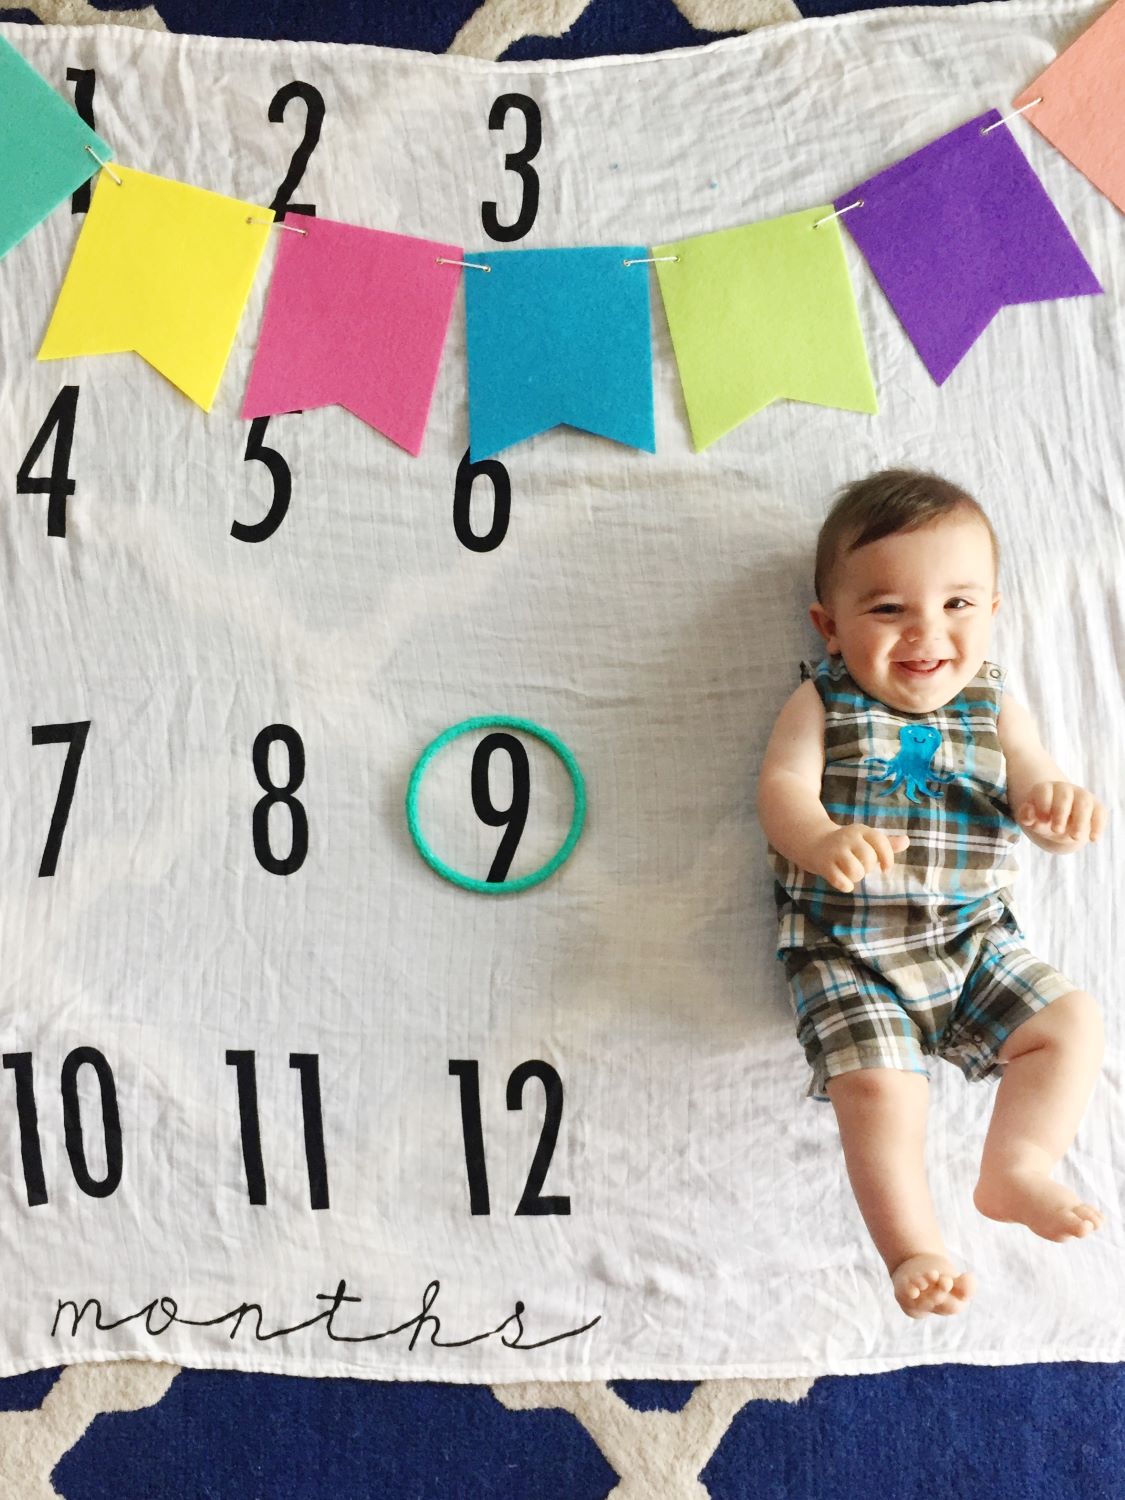 9-month Photos to Take of Your Baby